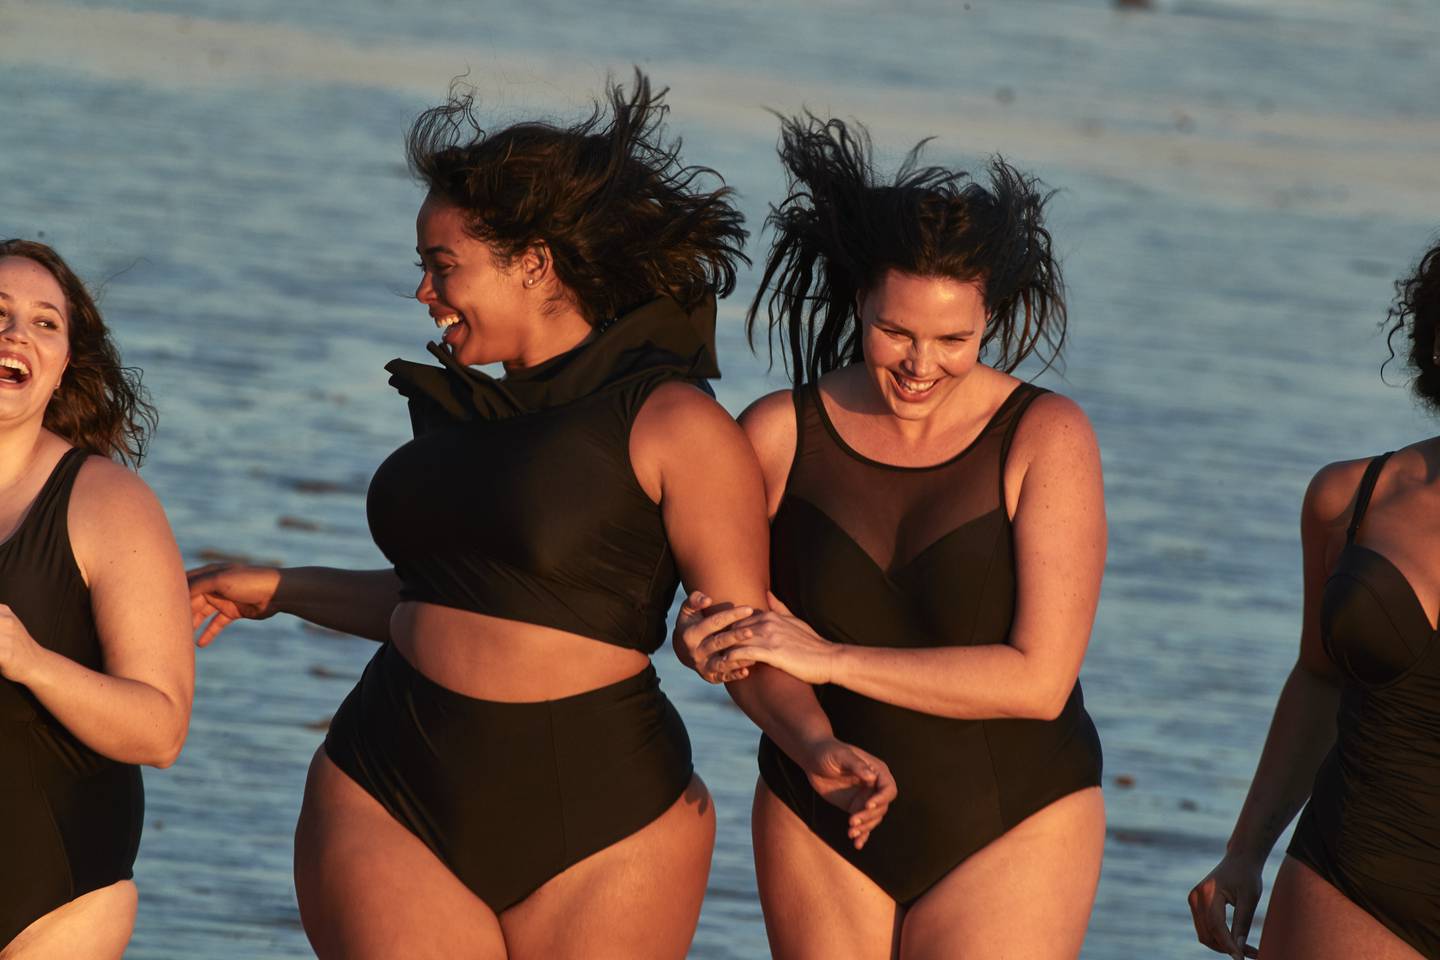 Torrid has became an industry leader for fit in plus size